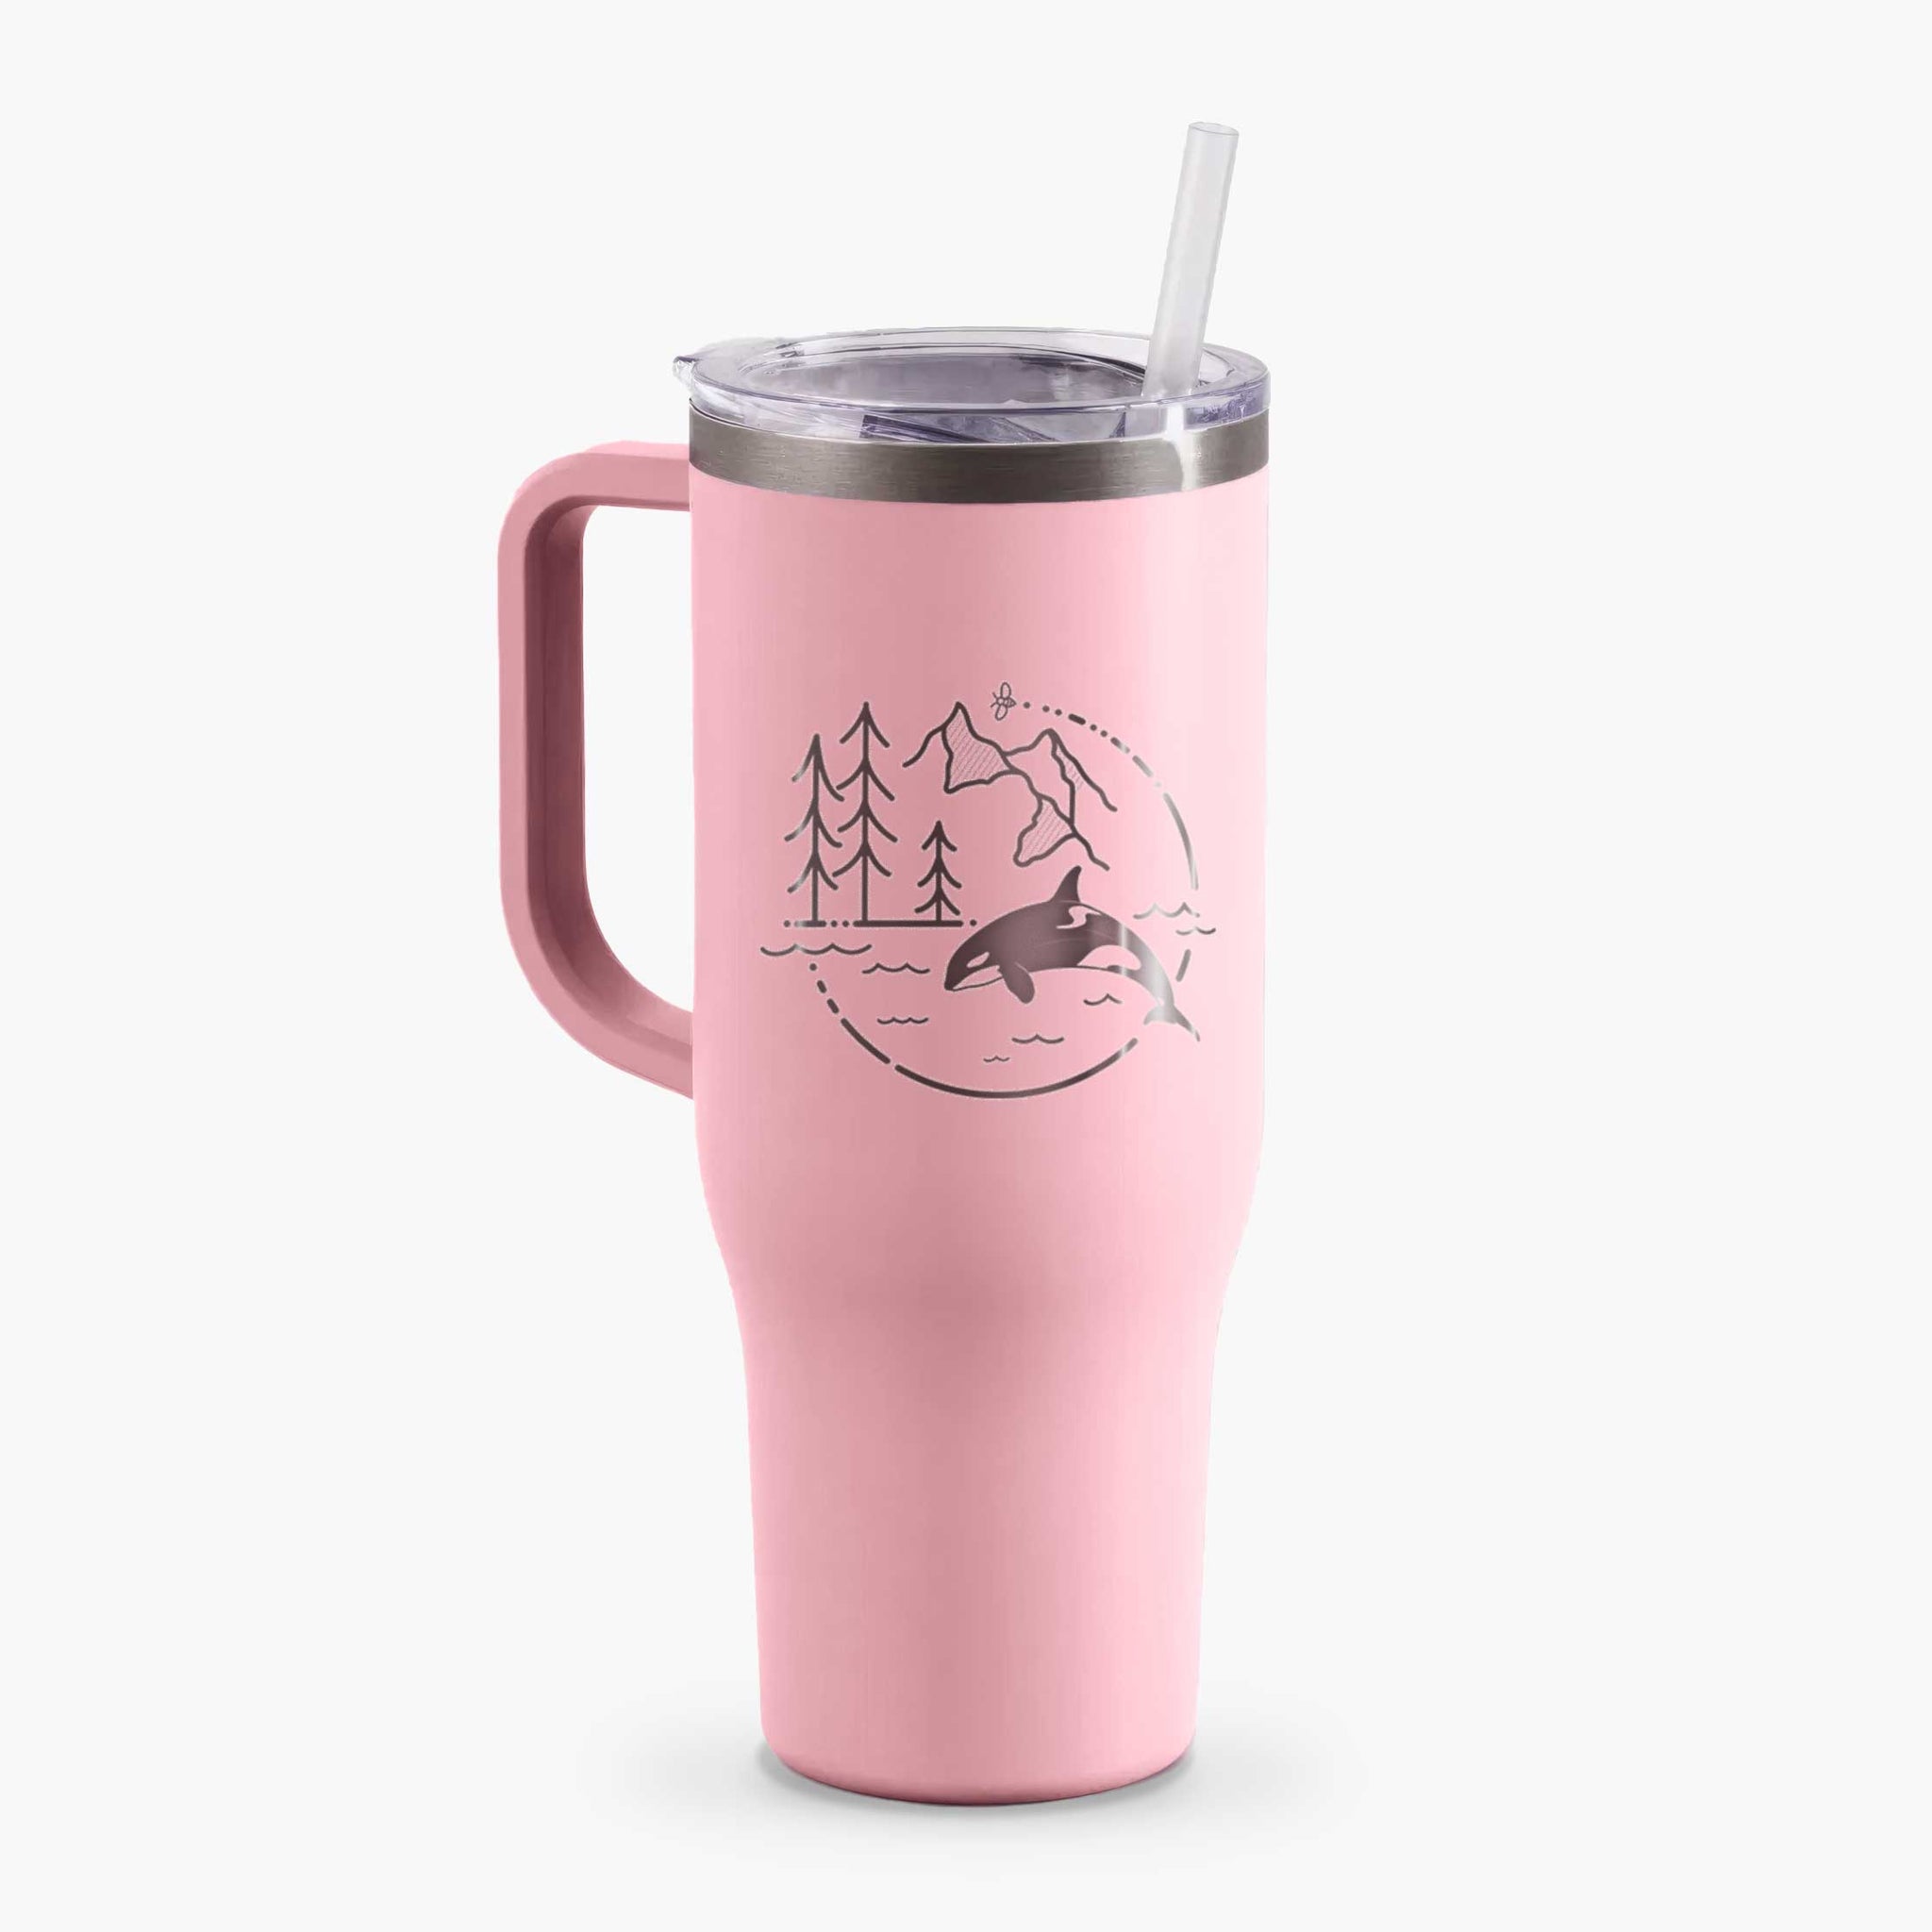 XL Double Wall Vacuum Insulated Stainless Steel Coffee Mug 20 fl. oz Pink  Floral